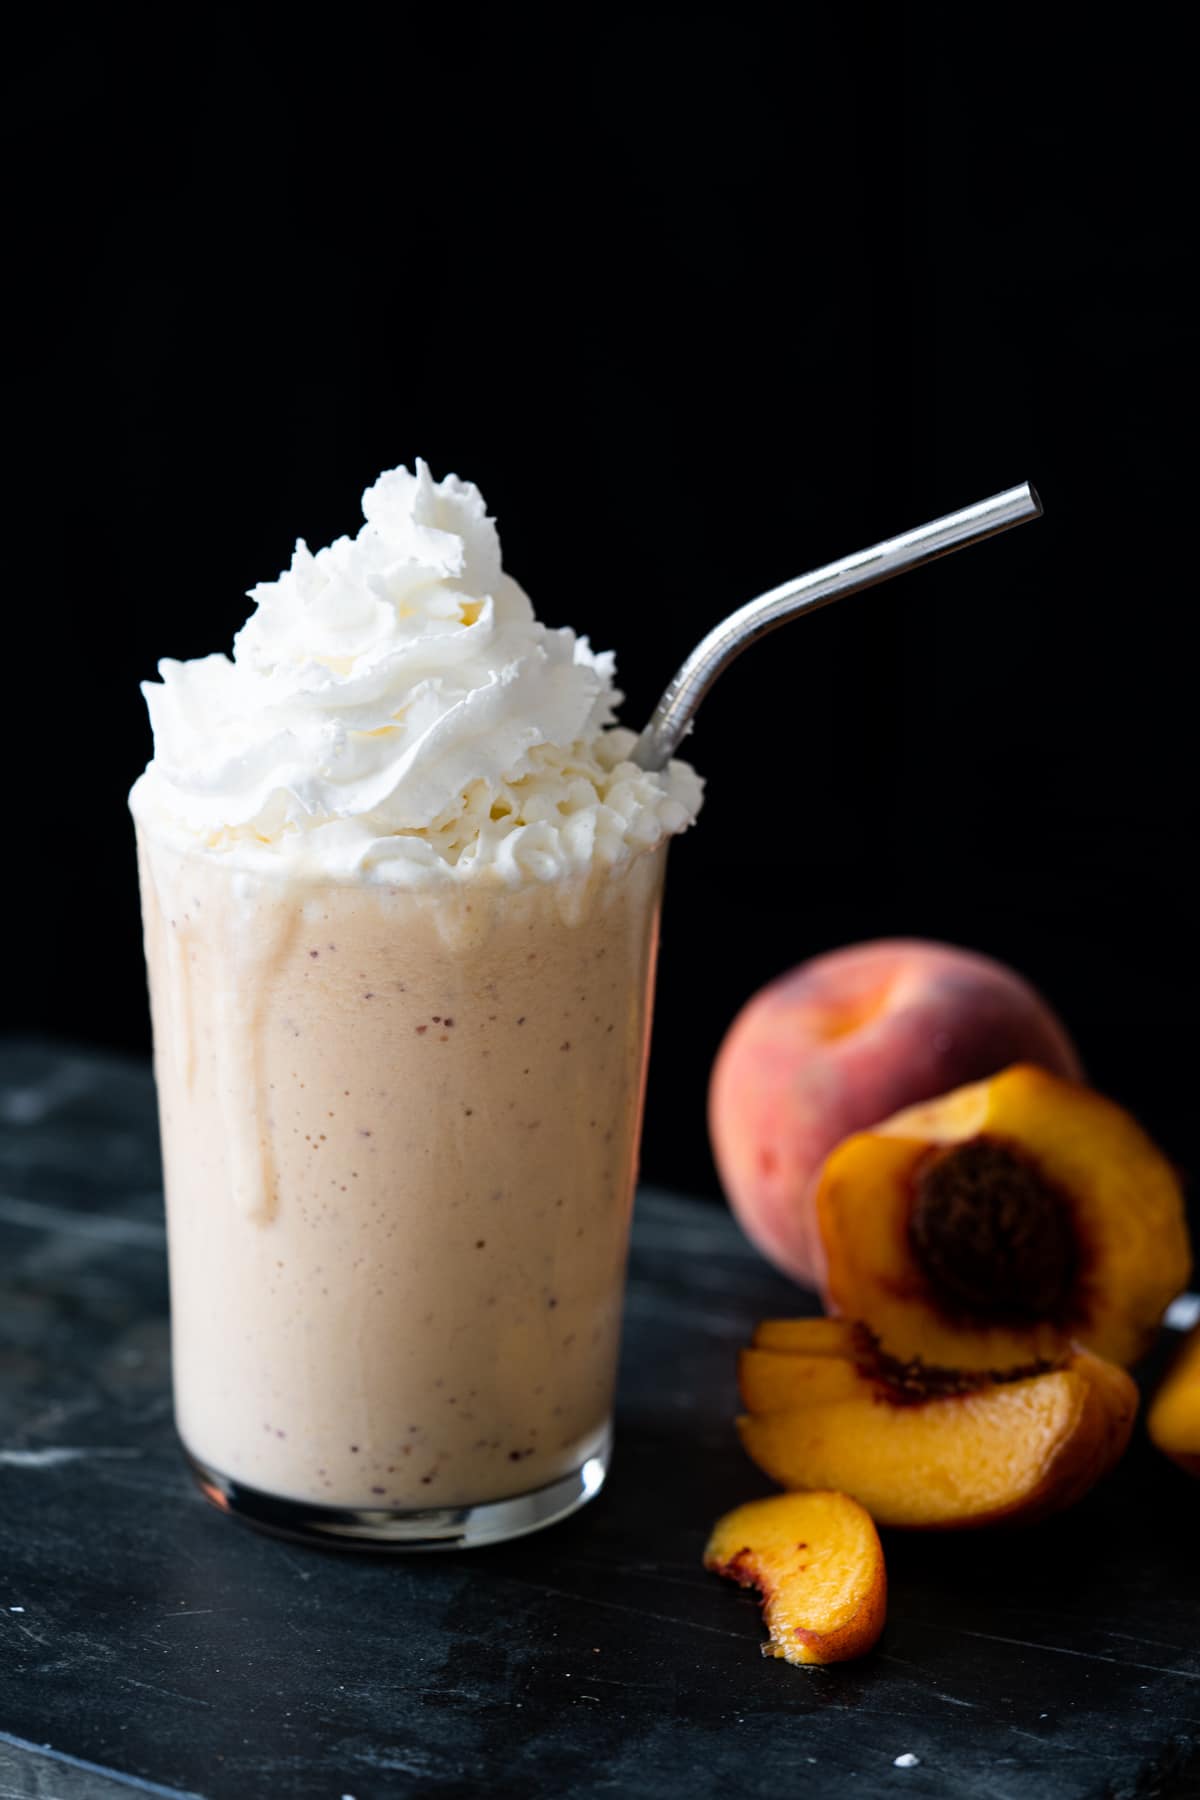 A keto peach milkshake with whipped cream, a metal straw and halved peaches on the side